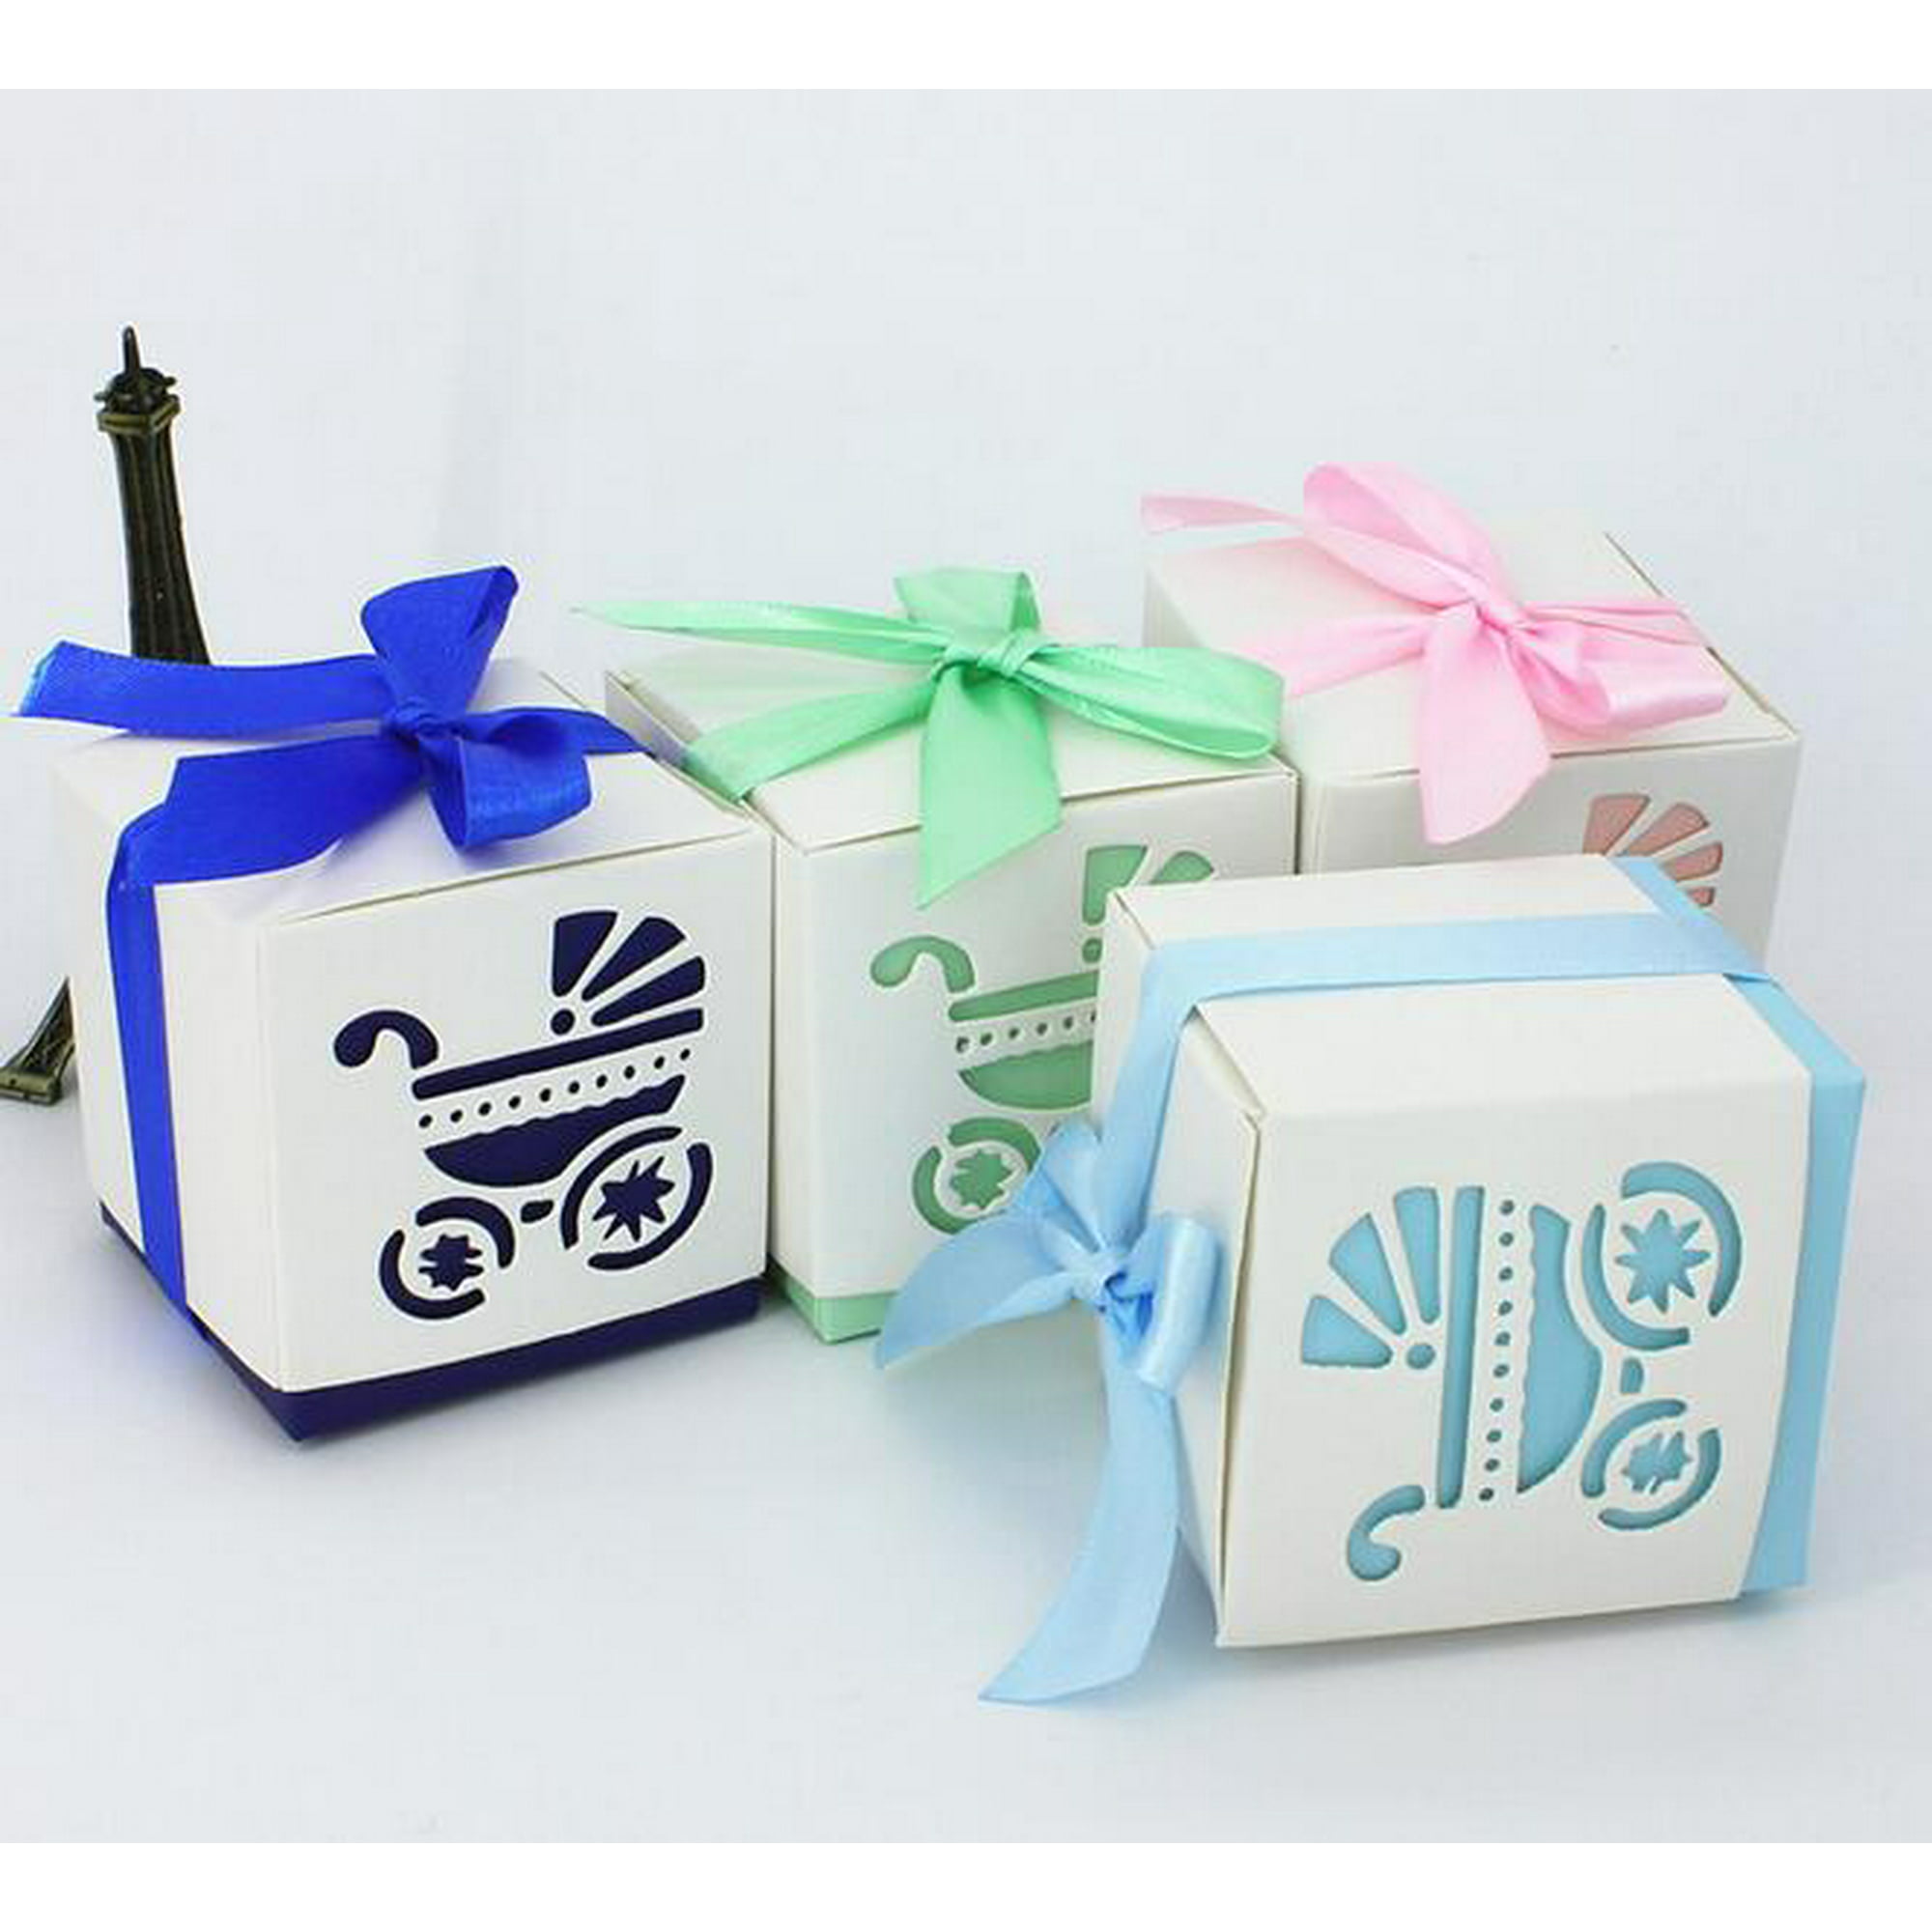 Adeeing 10pcs Creative Laser Cut Carriage Gift Candy Bomboniere Boxes For Wedding Party Baby Favor Pink Walmart Canada